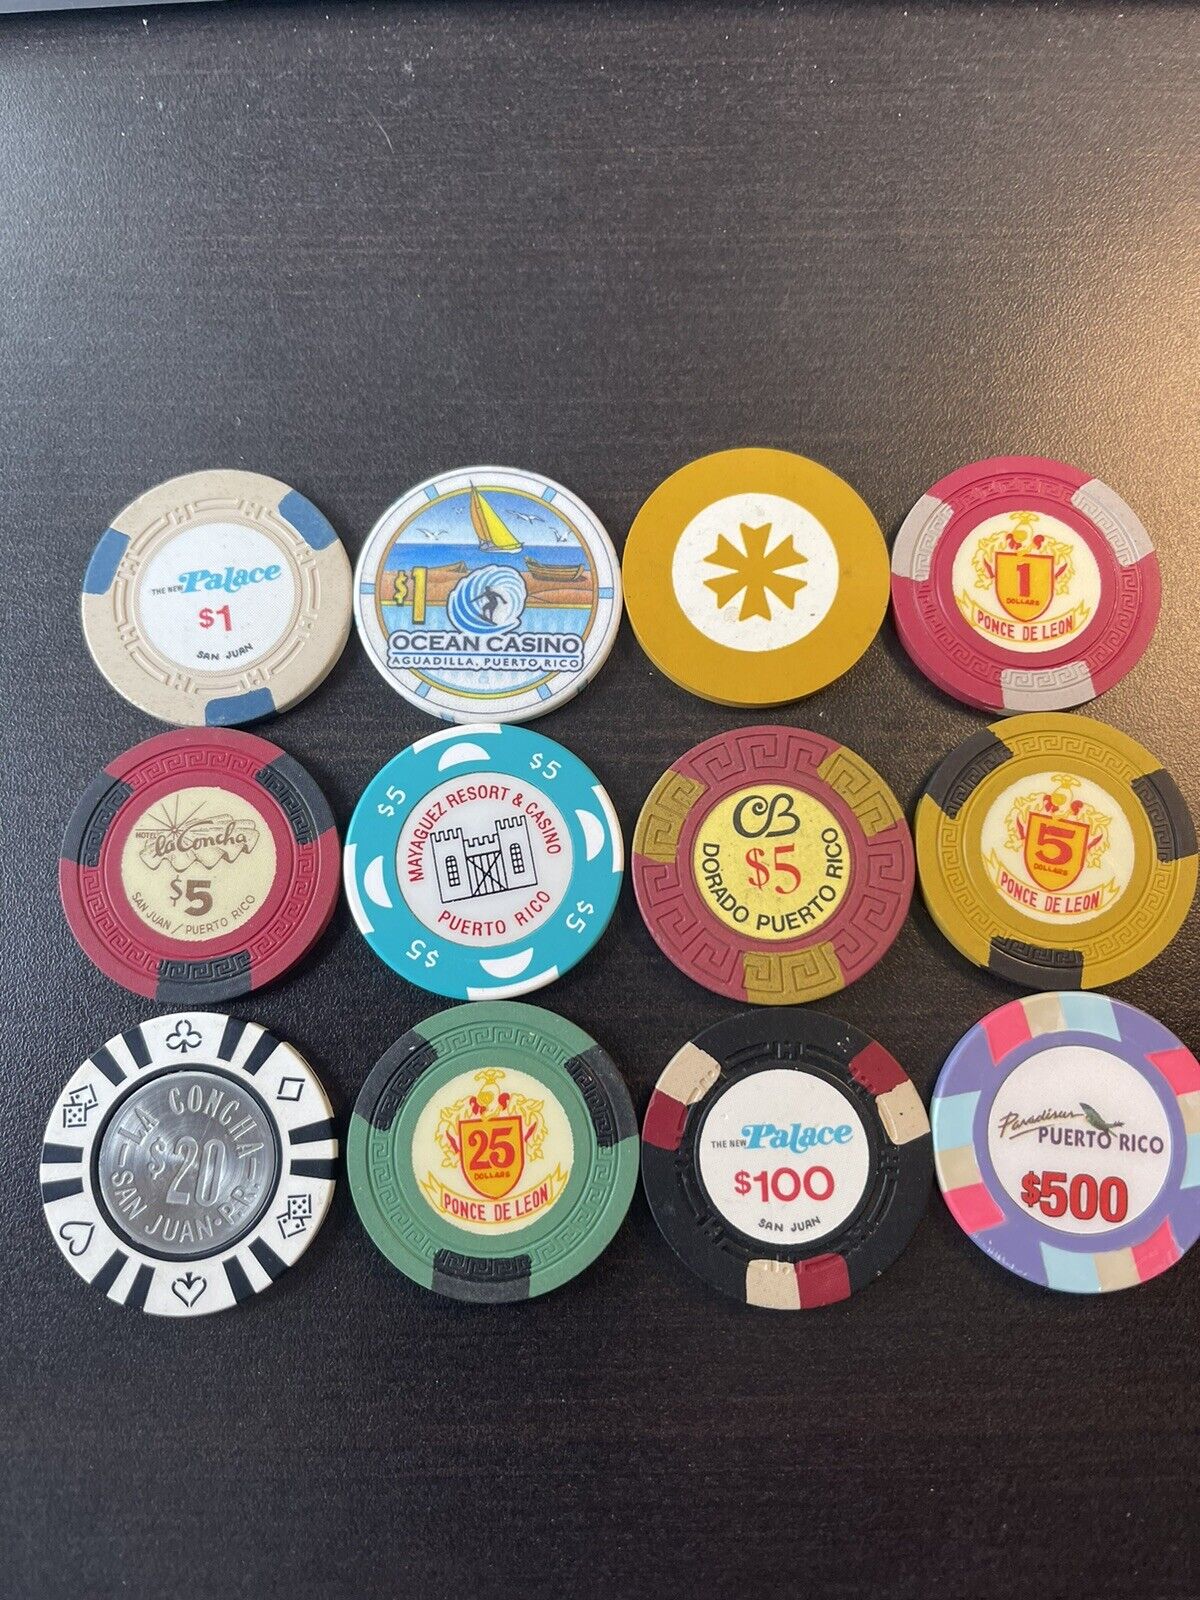 (12) Puerto Rico Casino Chips Vintage Chips $1 $5 $20 $25 $100 $500